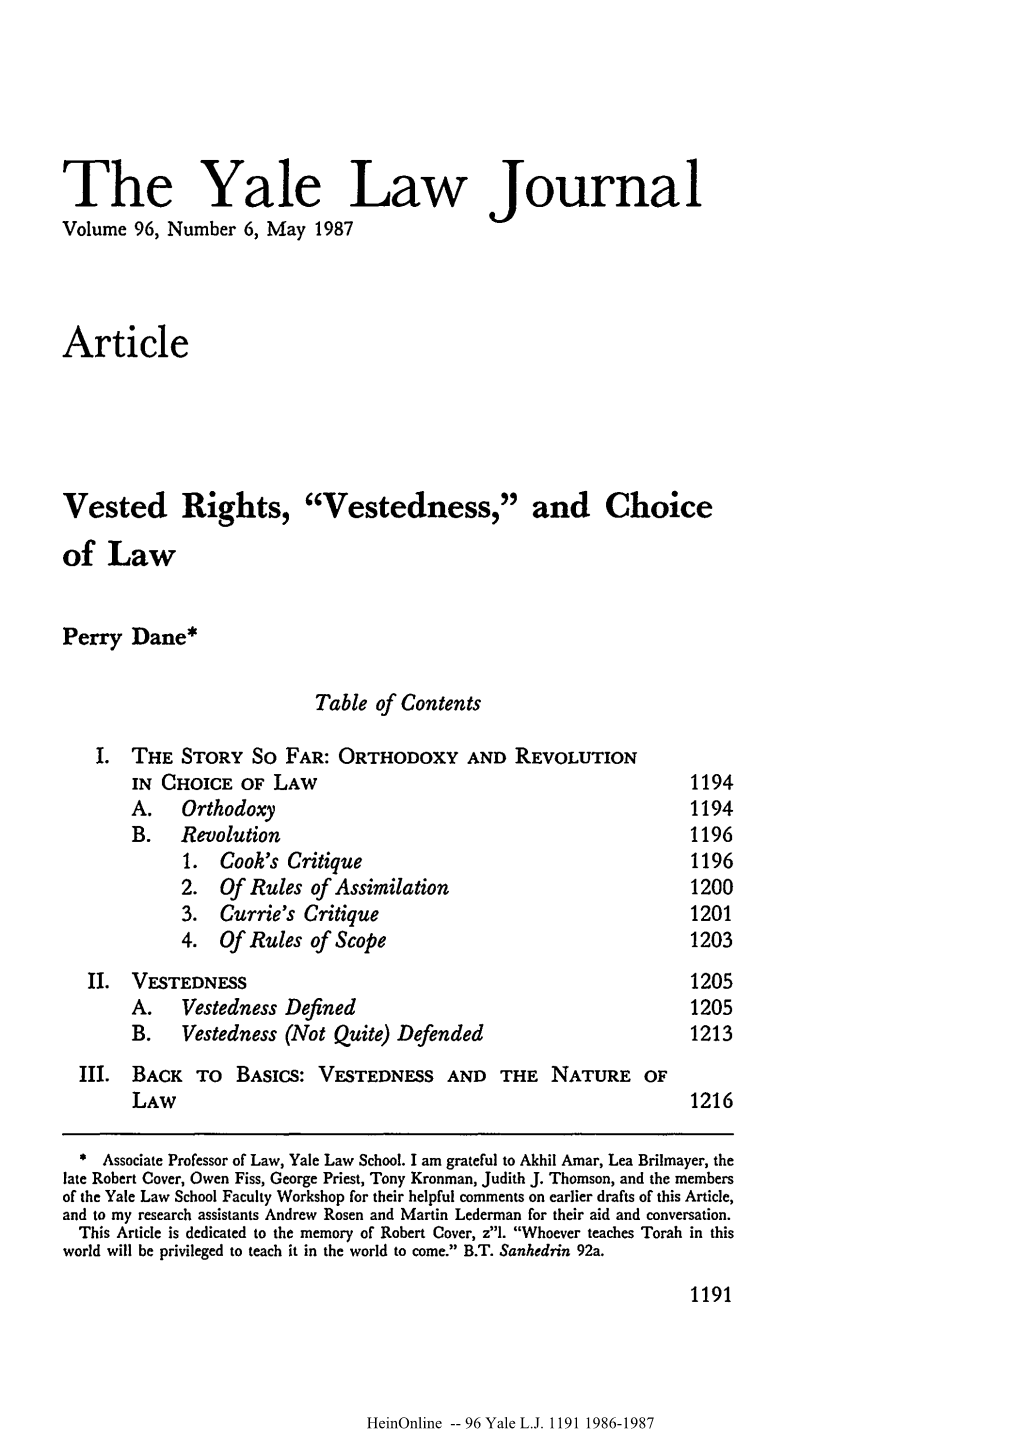 Vested Rights, "Vestedness," and Choice of Law